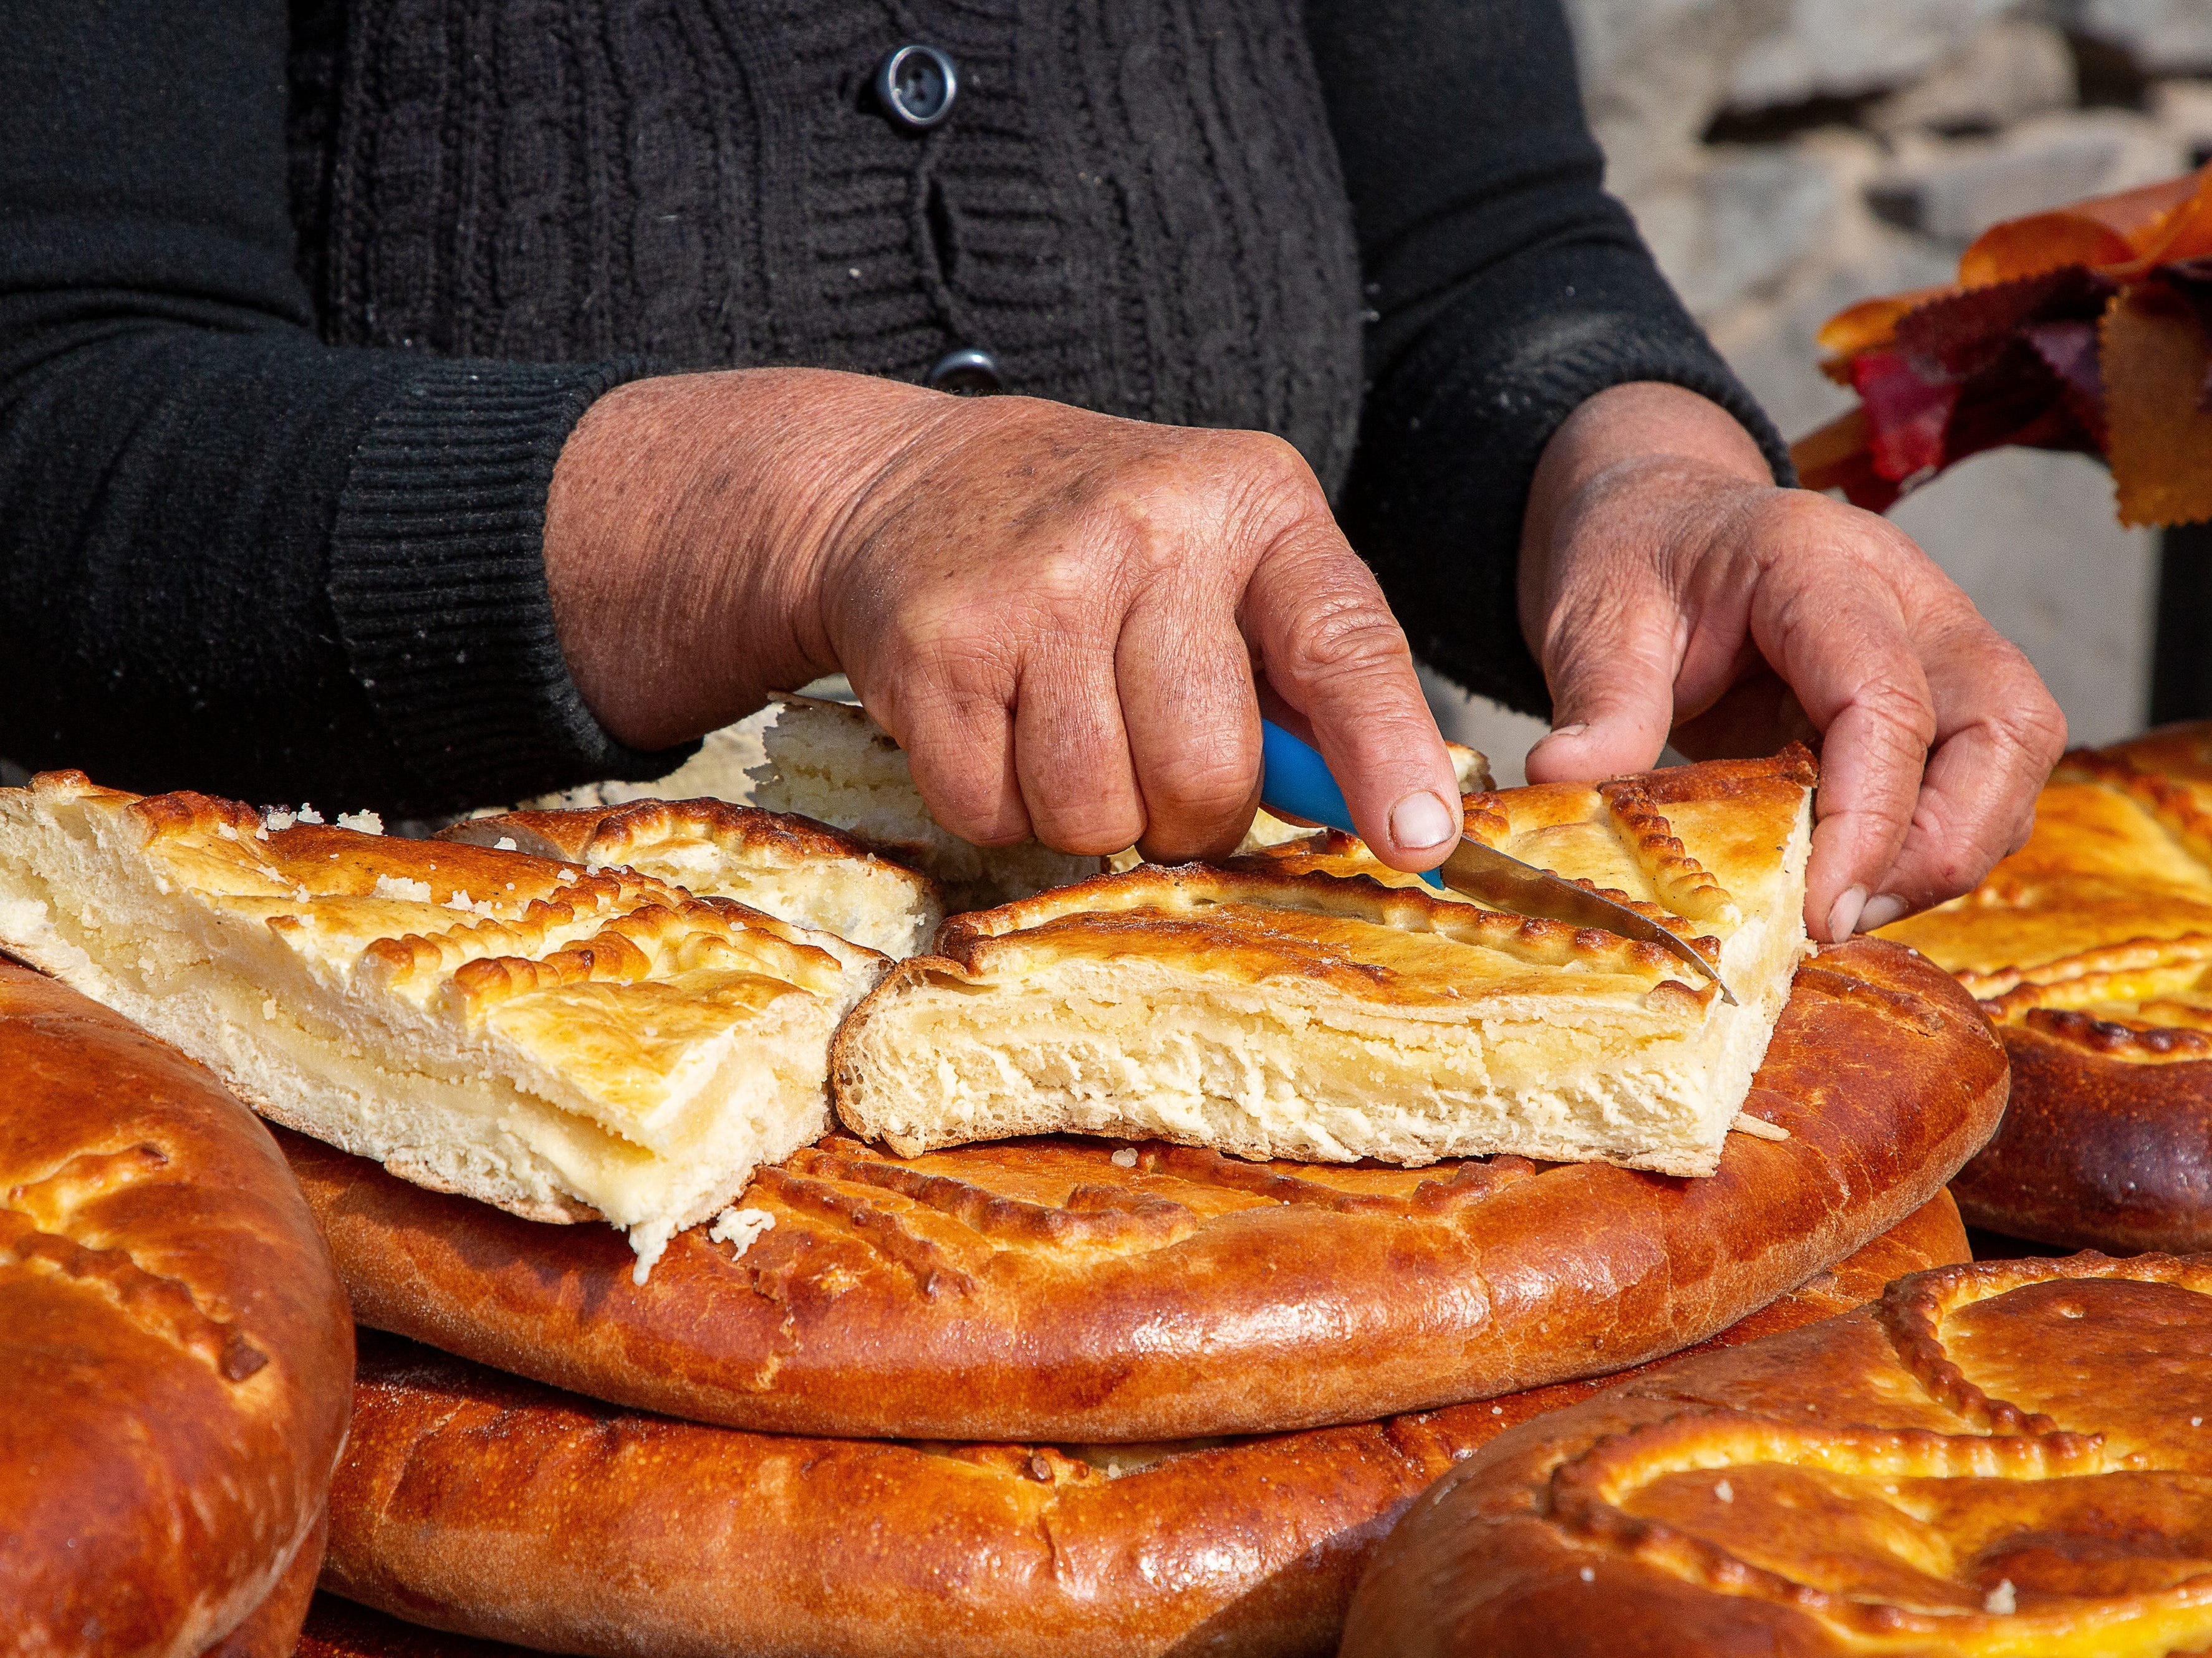 <p>There are many variations of gata in Armenia. No matter the shape, size, or form, it always pairs well with dark coffee or tea. </p><p><a href="https://www.seriouseats.com/gata-5185123">According to Serious Eats</a>, the light pastry is made from yeasted dough loaded with Greek yogurt and vanilla. </p><p>It's usually served on a flattened disc or rolled into handheld bites, topped with chopped nuts, and scored with decorative patterns. </p>